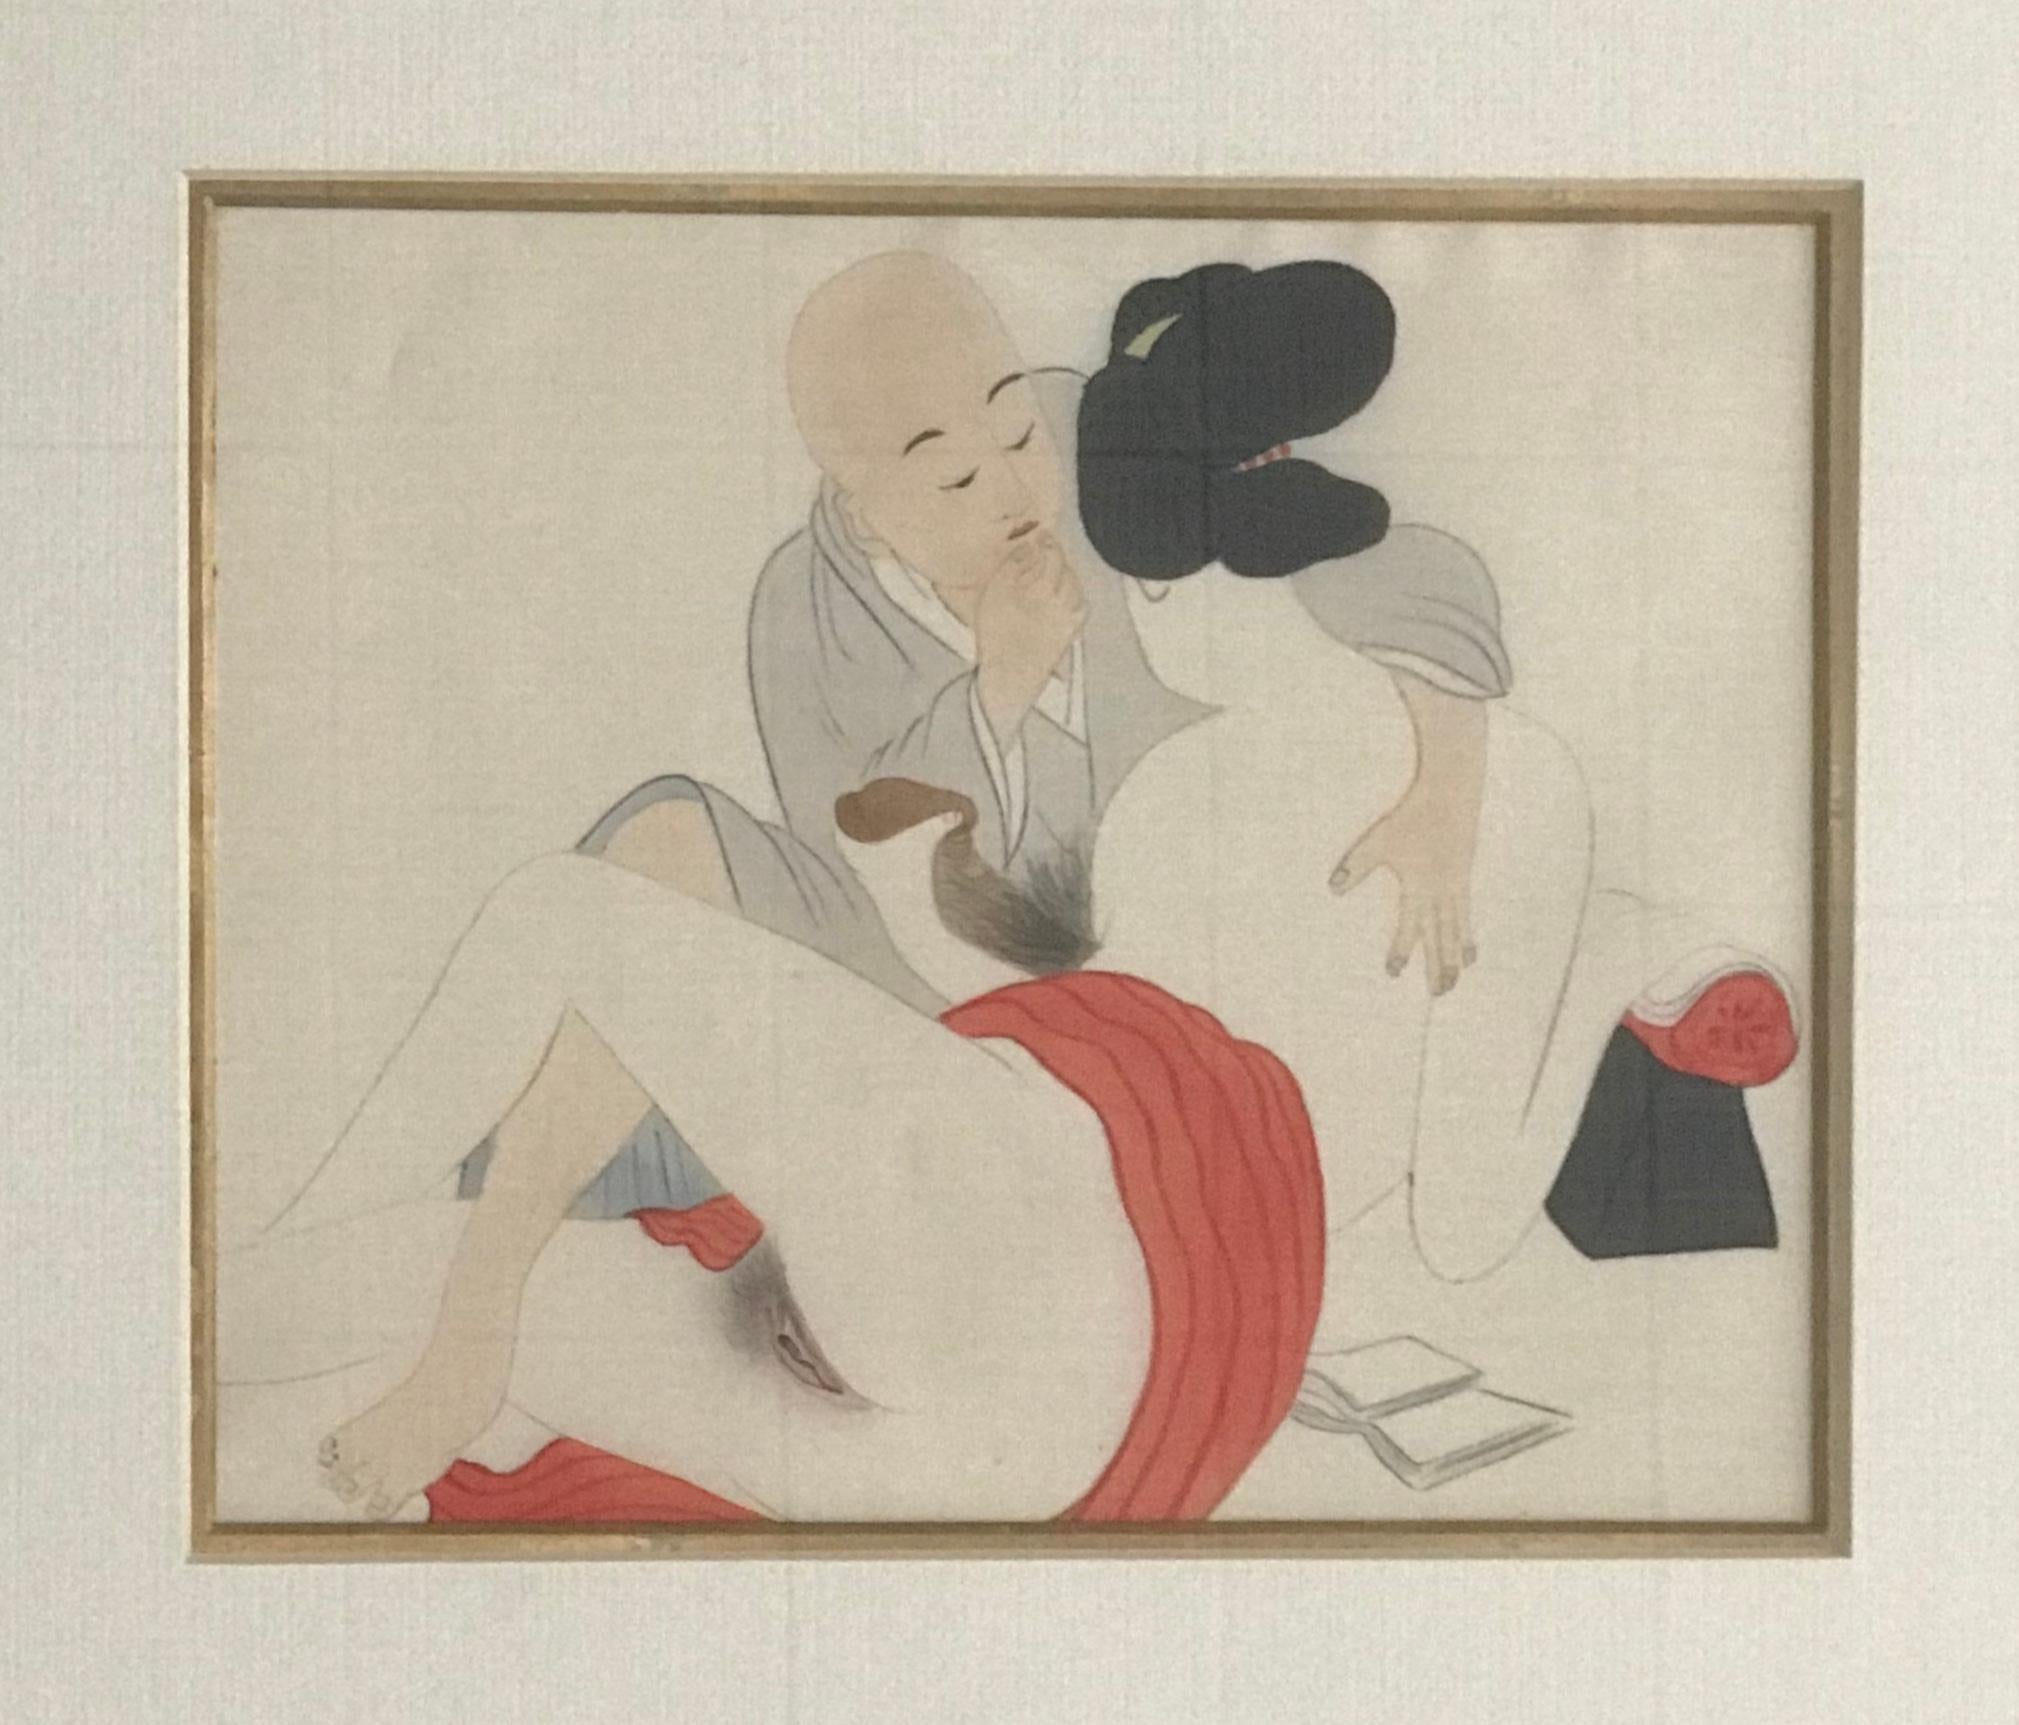 A wonderful set of four Shunga painting (the Japanese erotic painting) from Meiji period, circa 19th century. The hand-painted scene of domestic sexual pleasure were framed in beautiful wood frames wit gold leaf corners.
Provenance: Purchased from